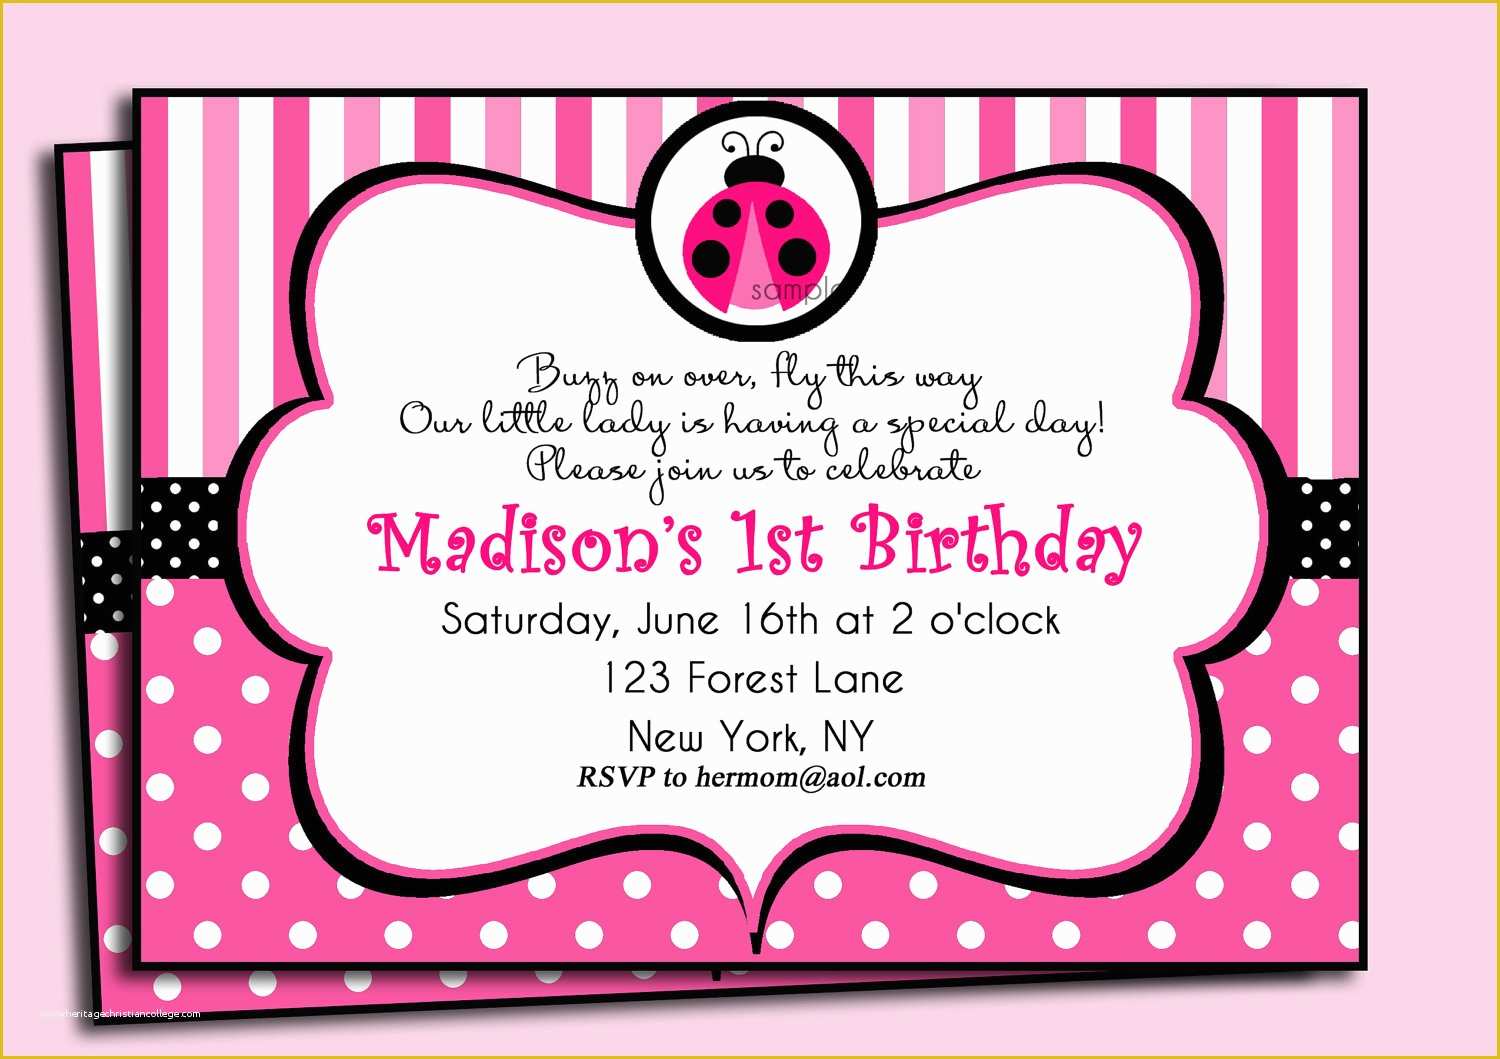 Free Printable Ladybug Baby Shower Invitations Templates Of Template Ladybug Baby Shower Invitations with Personalized